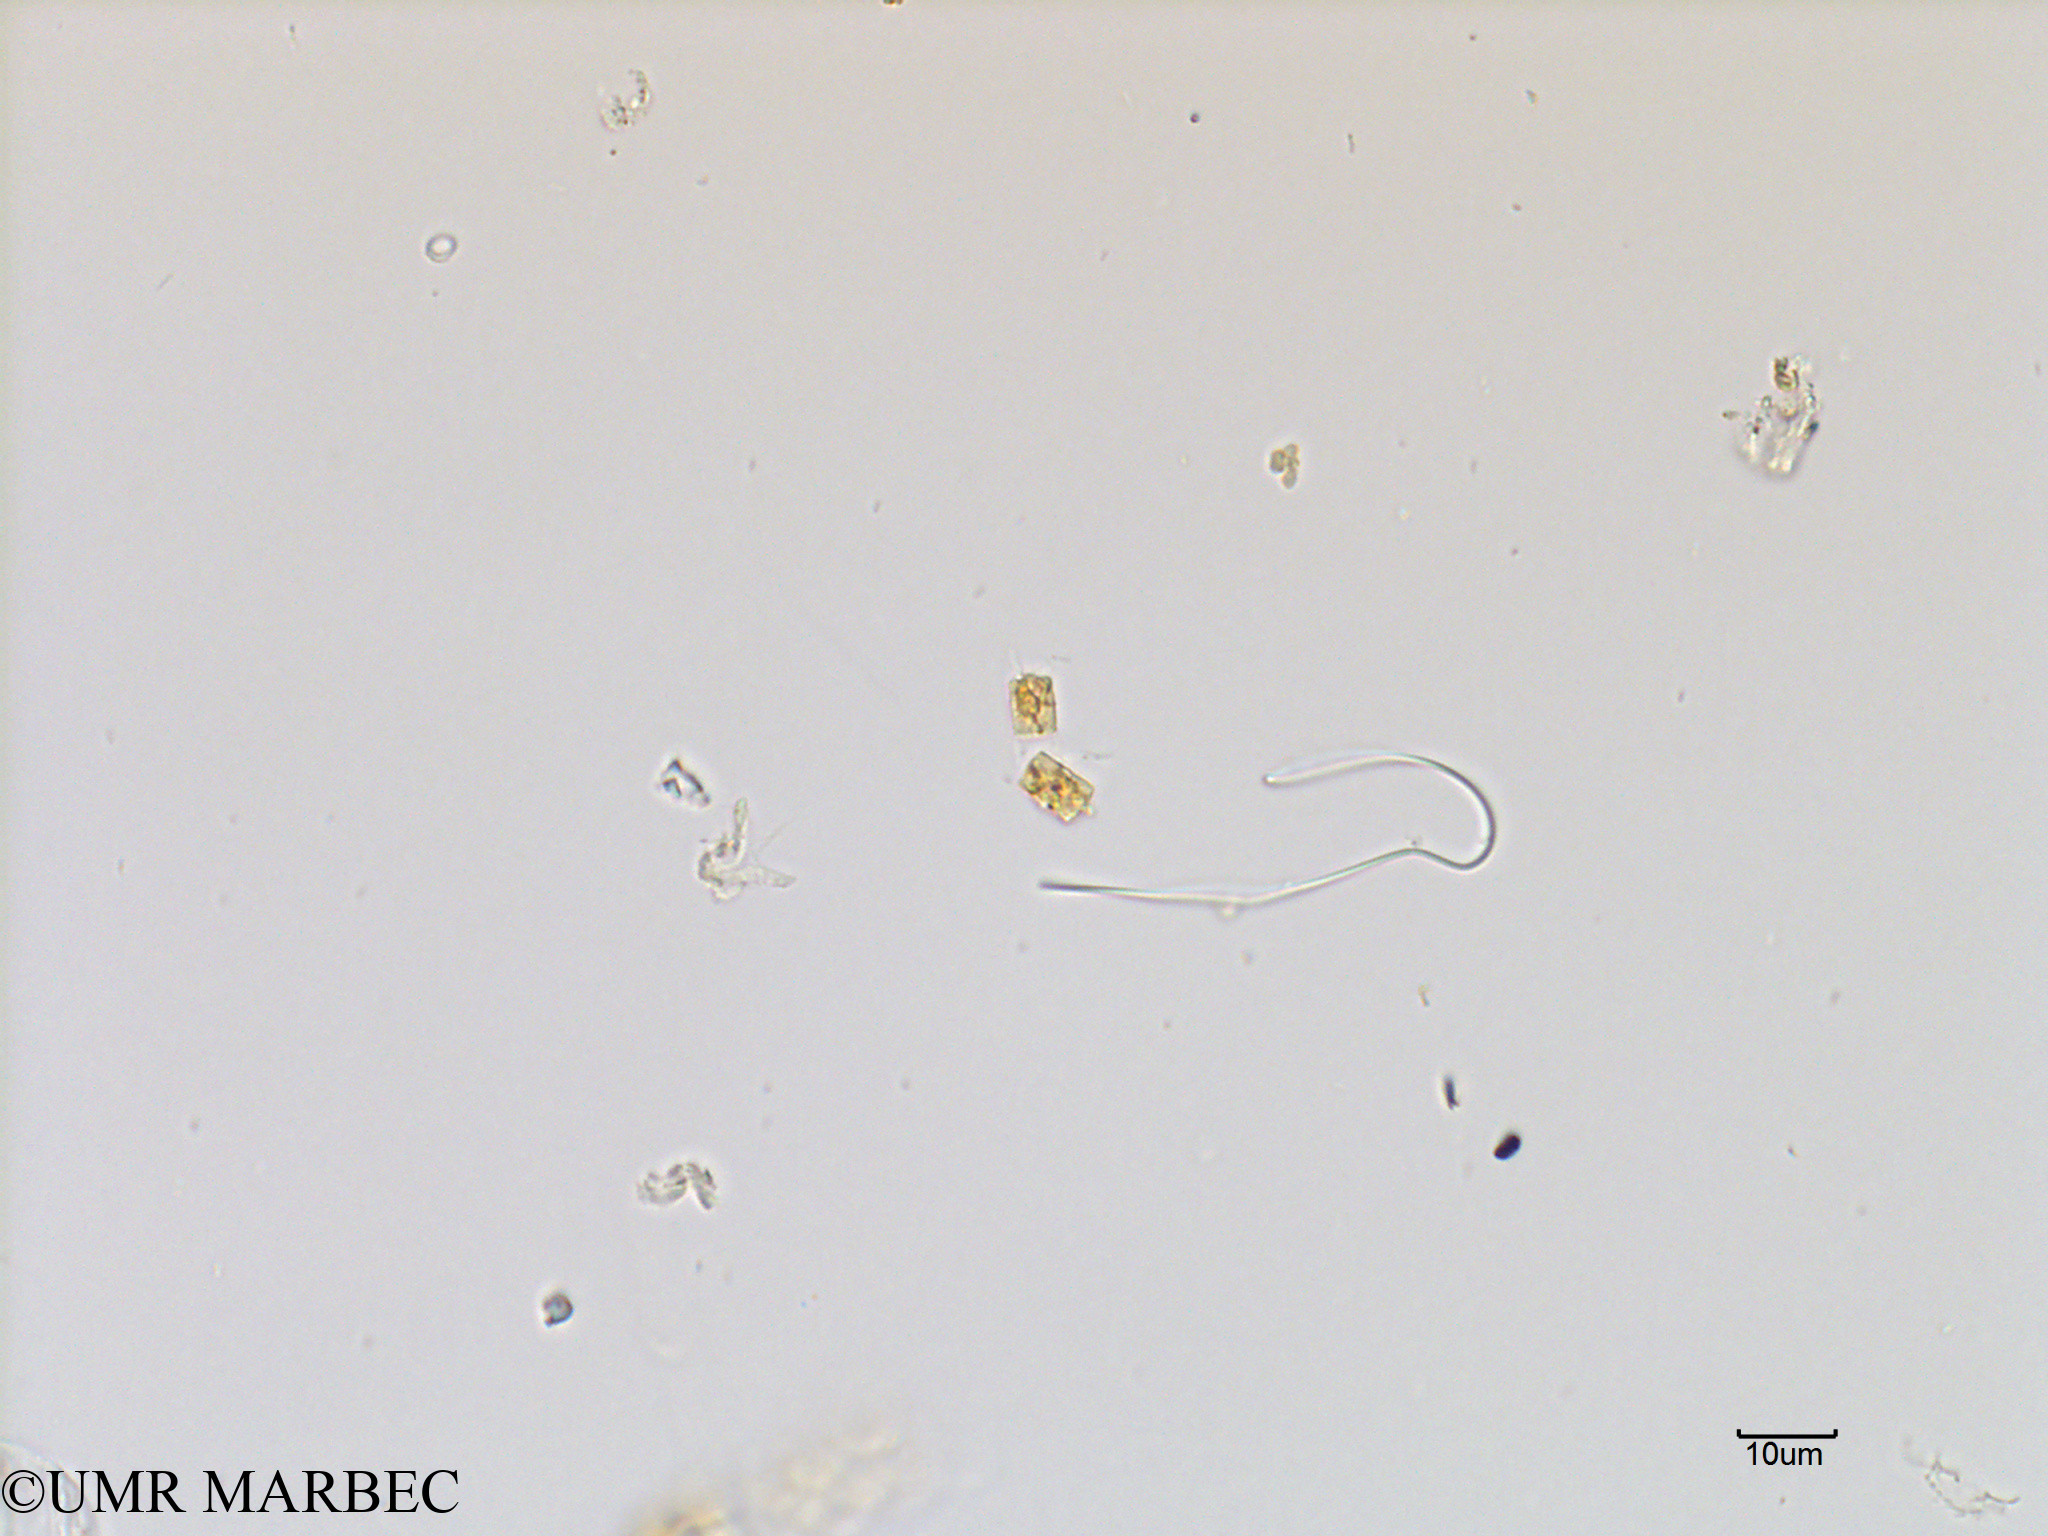 phyto/Scattered_Islands/mayotte_lagoon/SIREME May 2016/Chaetoceros sp22 (MAY3_petite centrique cf chaetoceros).tif(copy).jpg